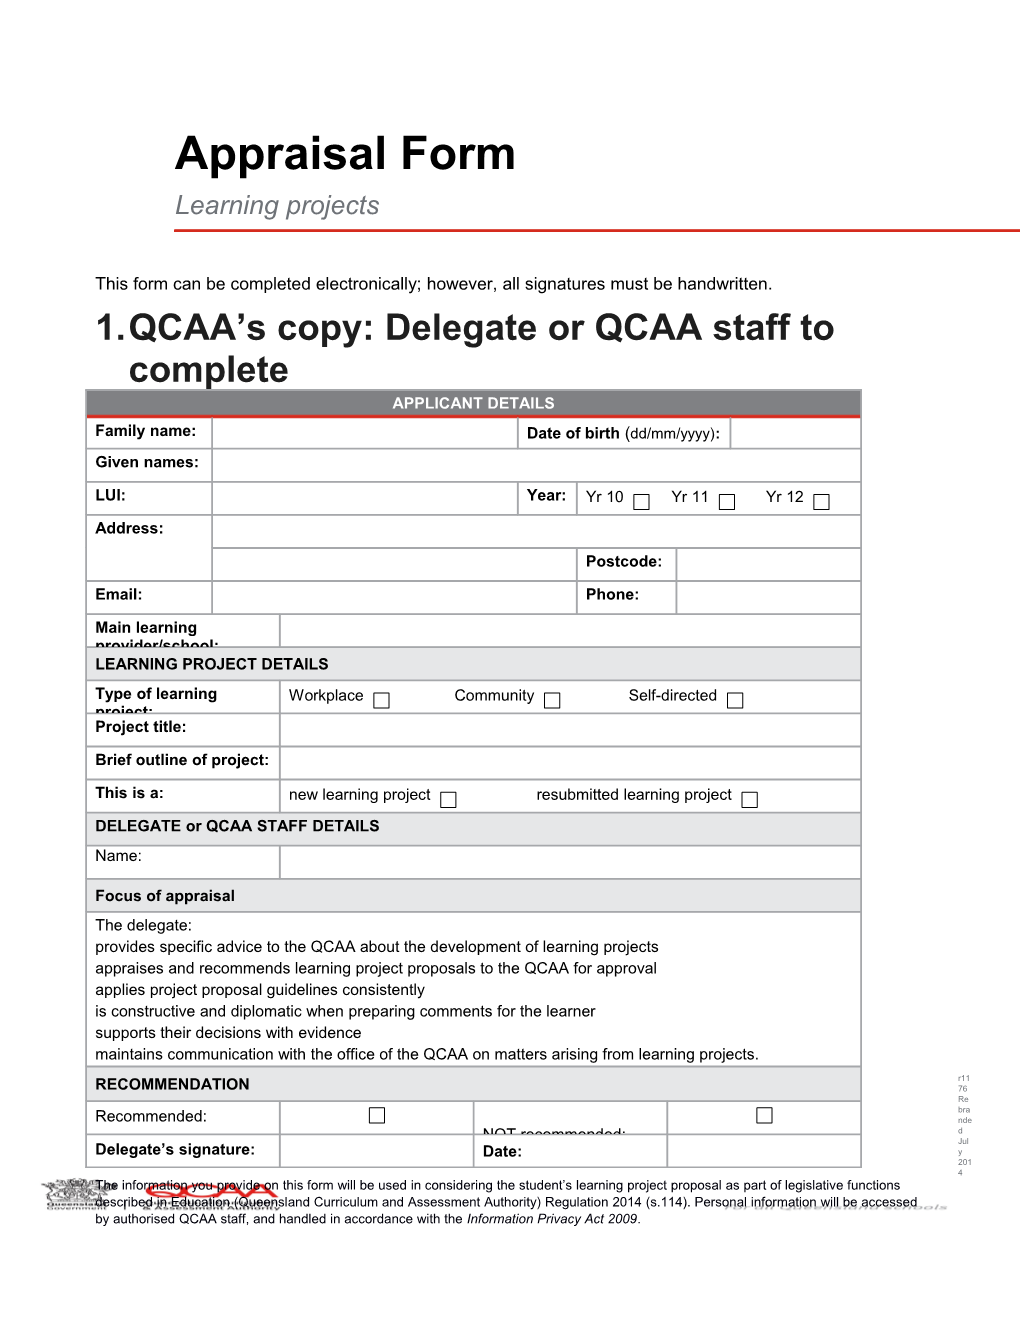 Learning Project Appraisal Form